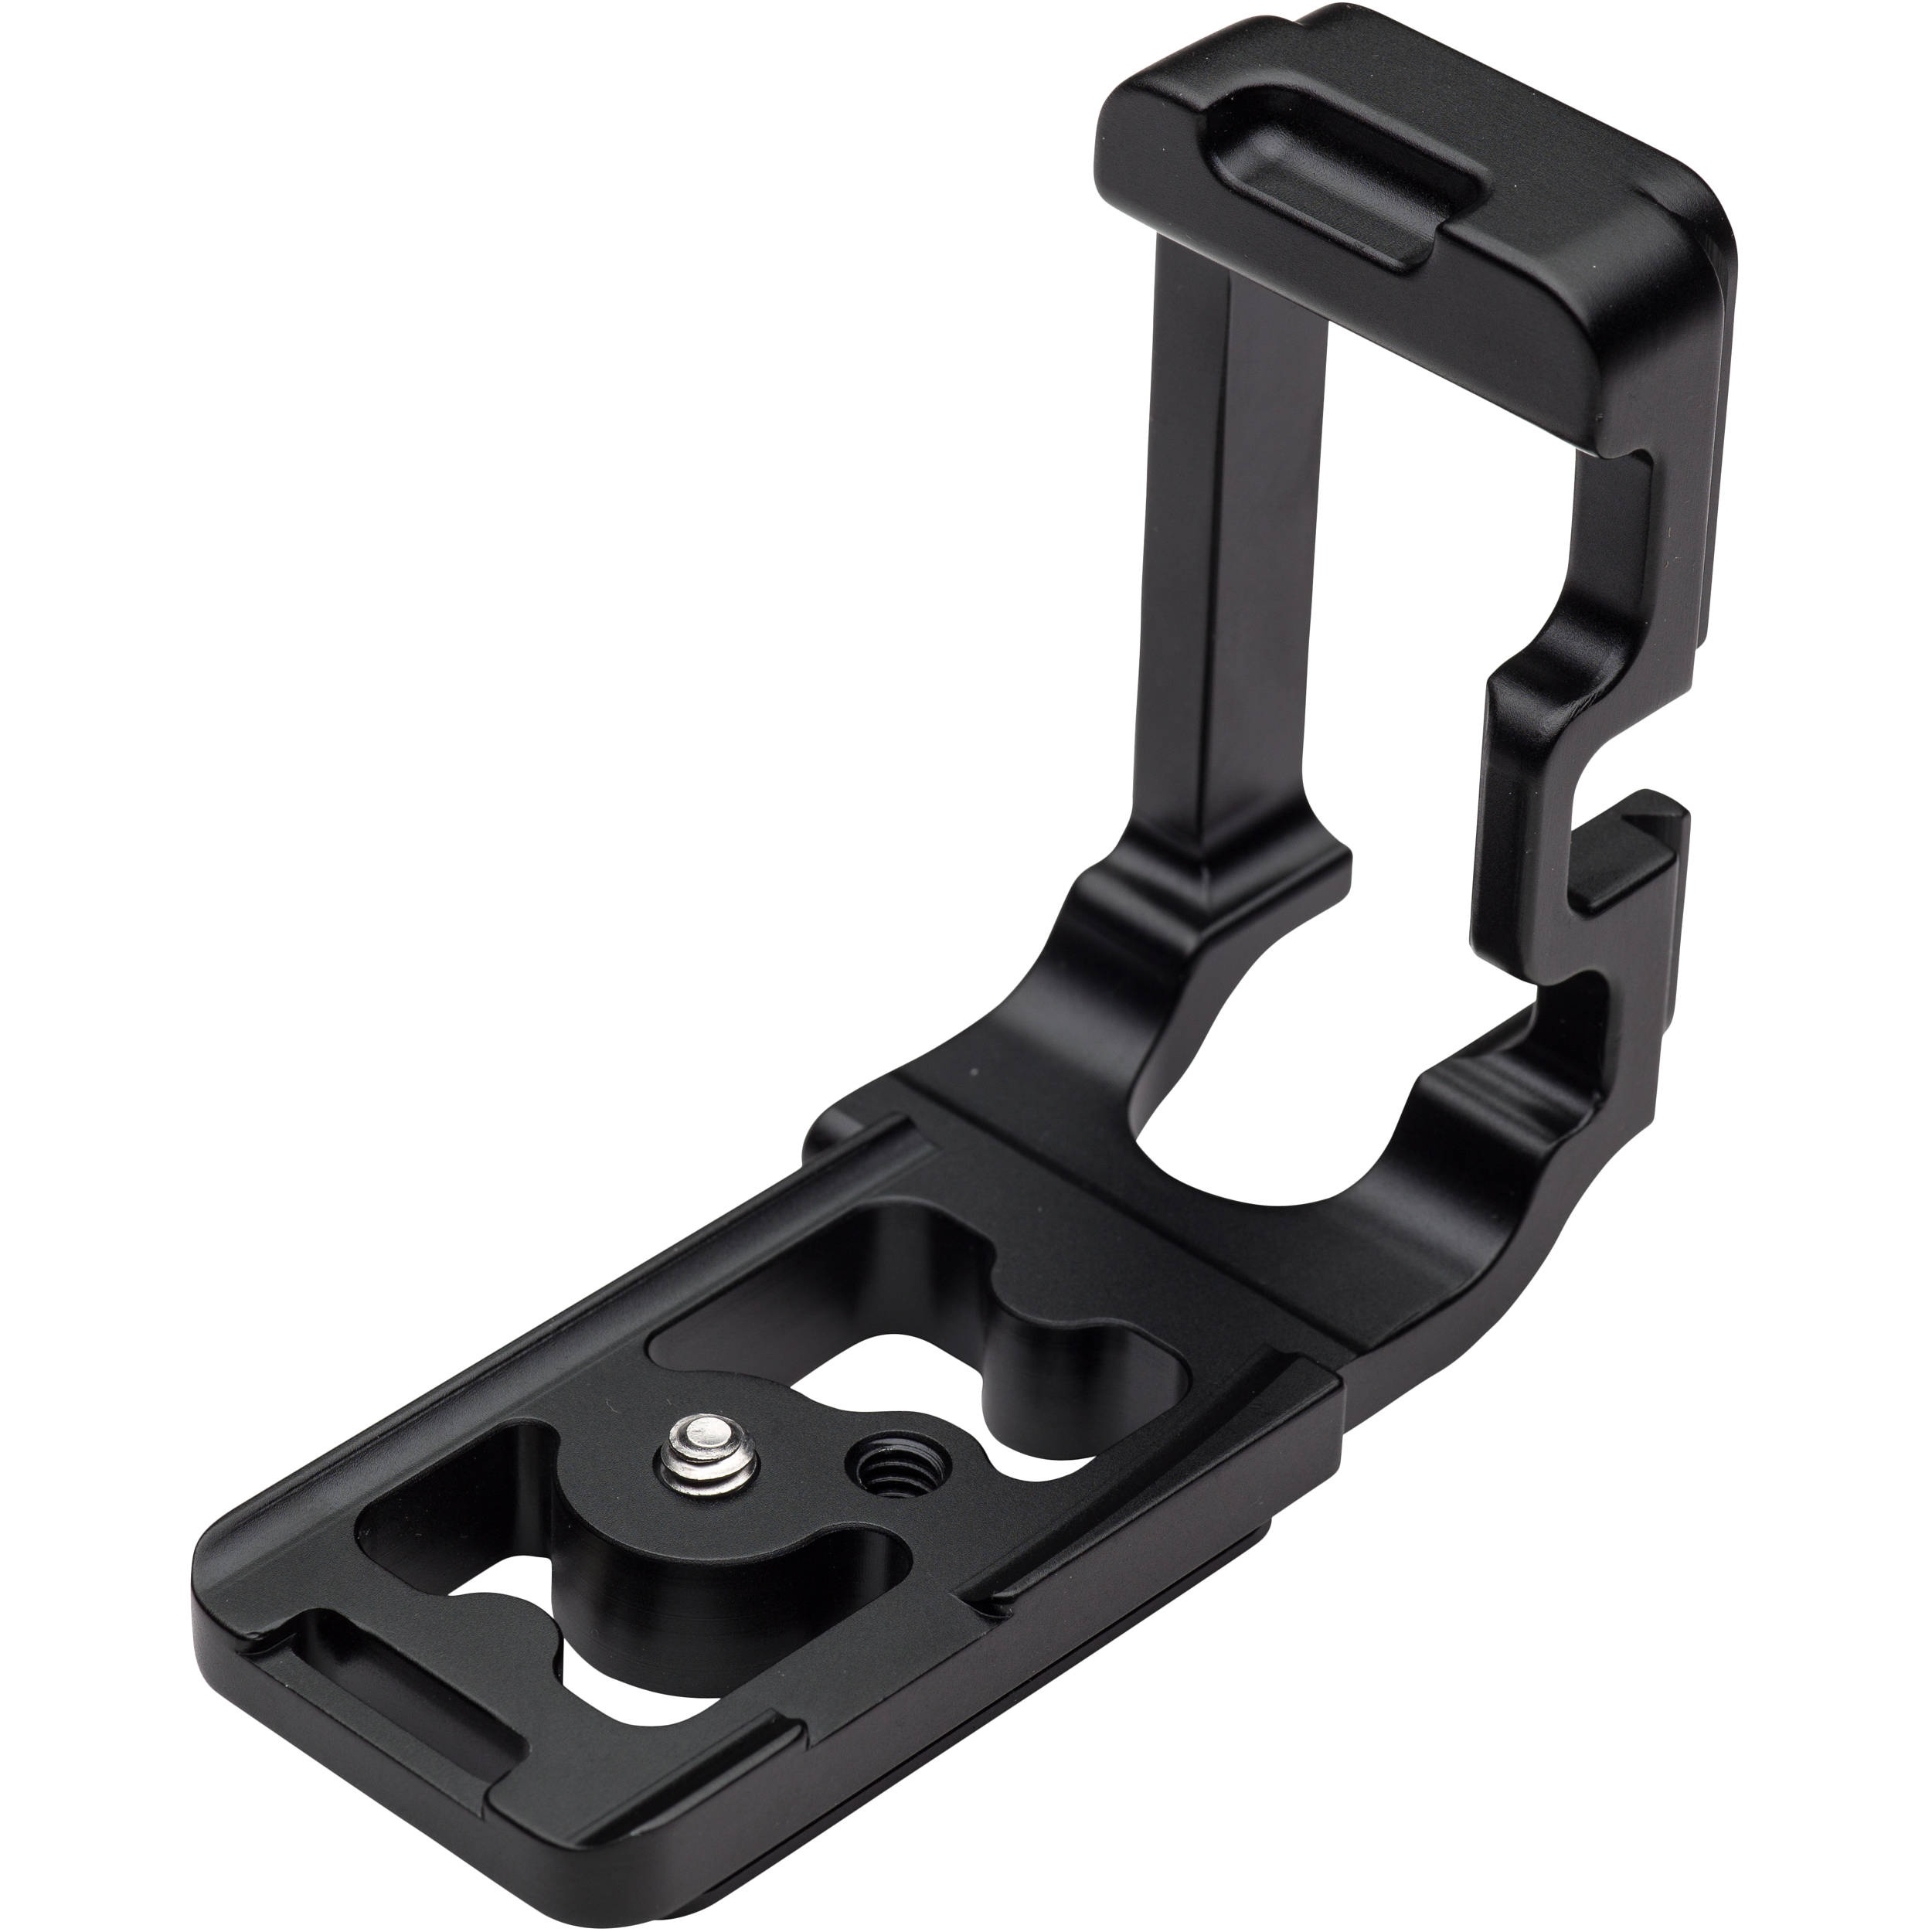 Benro LPC6D Quick-Release L-Plate for Canon 6D